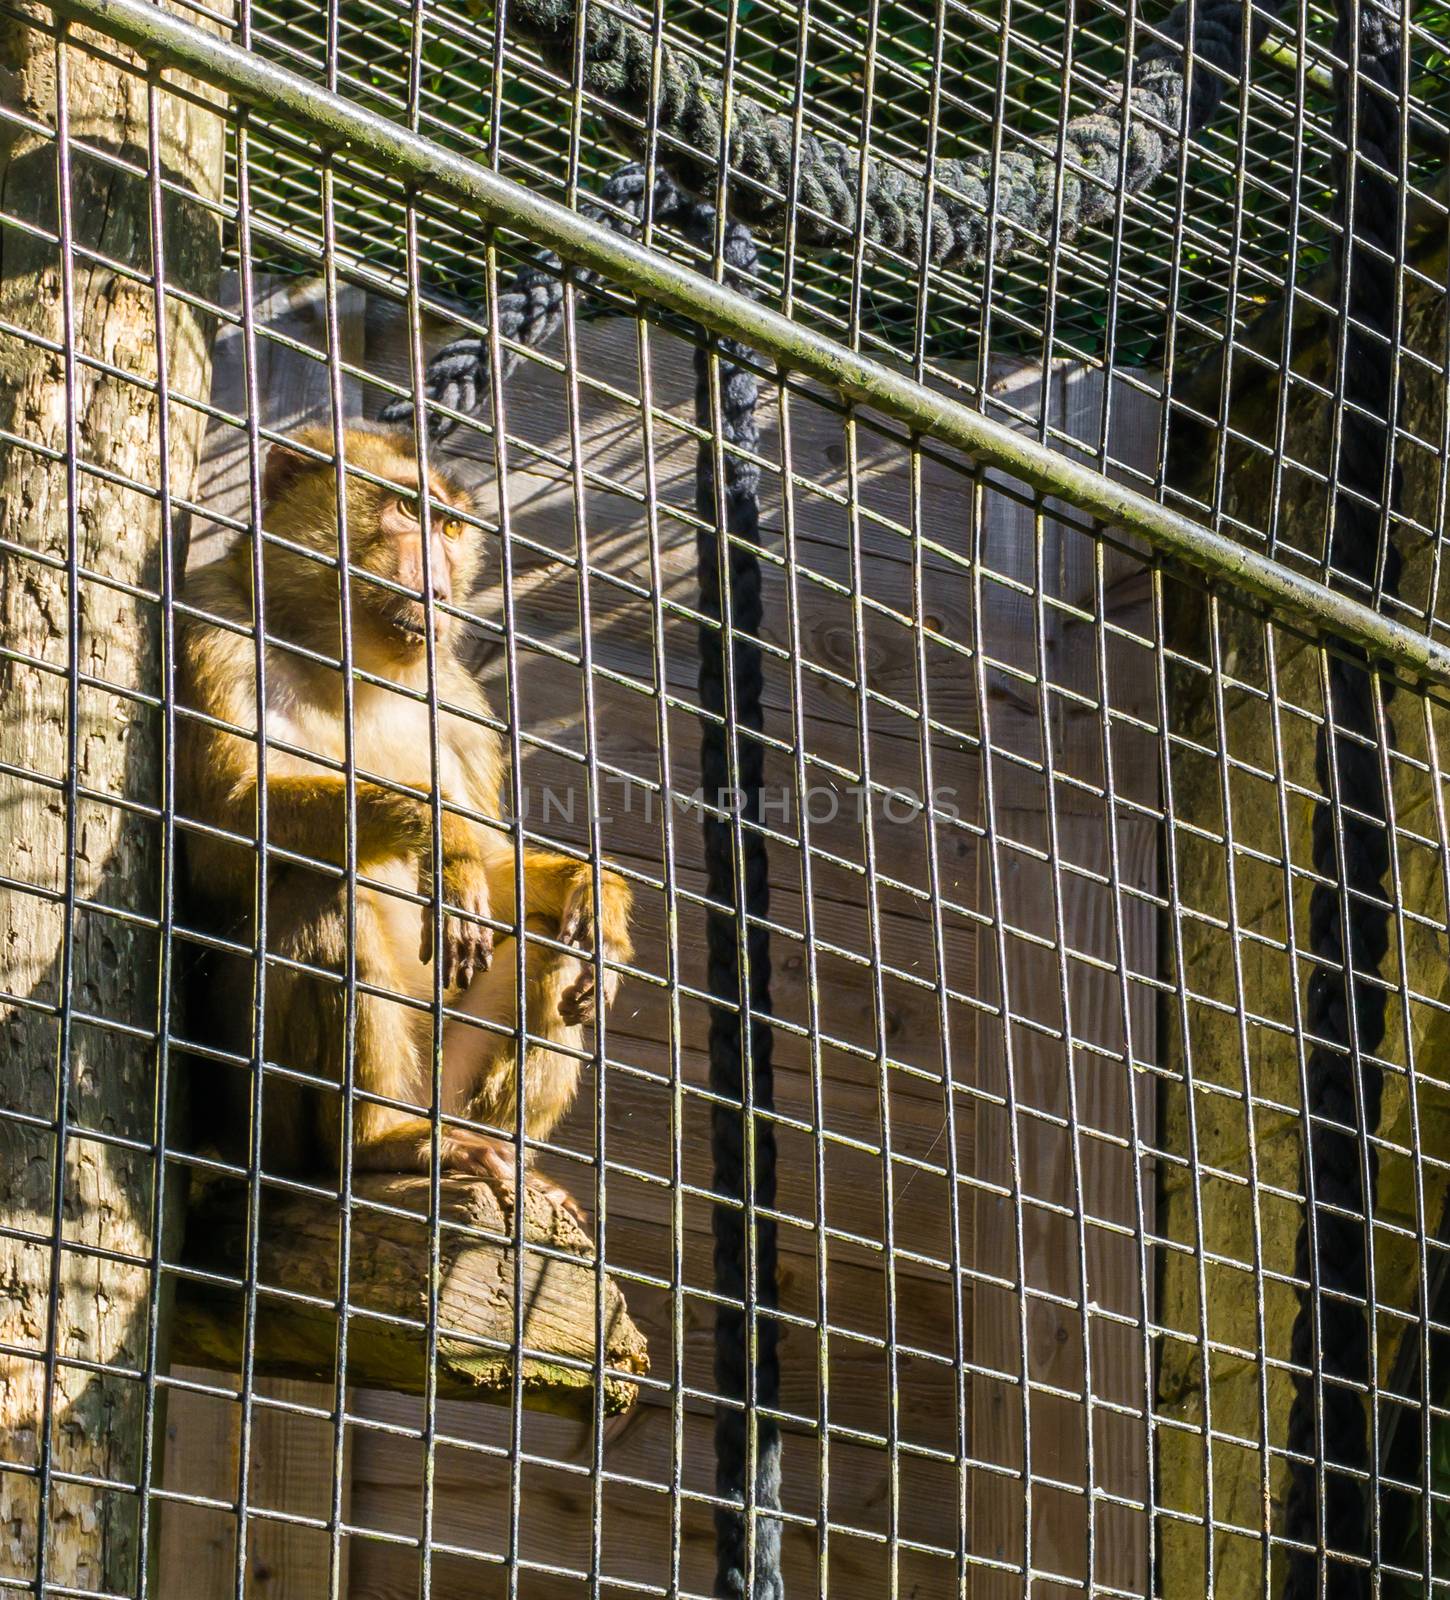 Caged brown macaque monkey behind metal fence cage sitting in a pole and looking outside by charlottebleijenberg